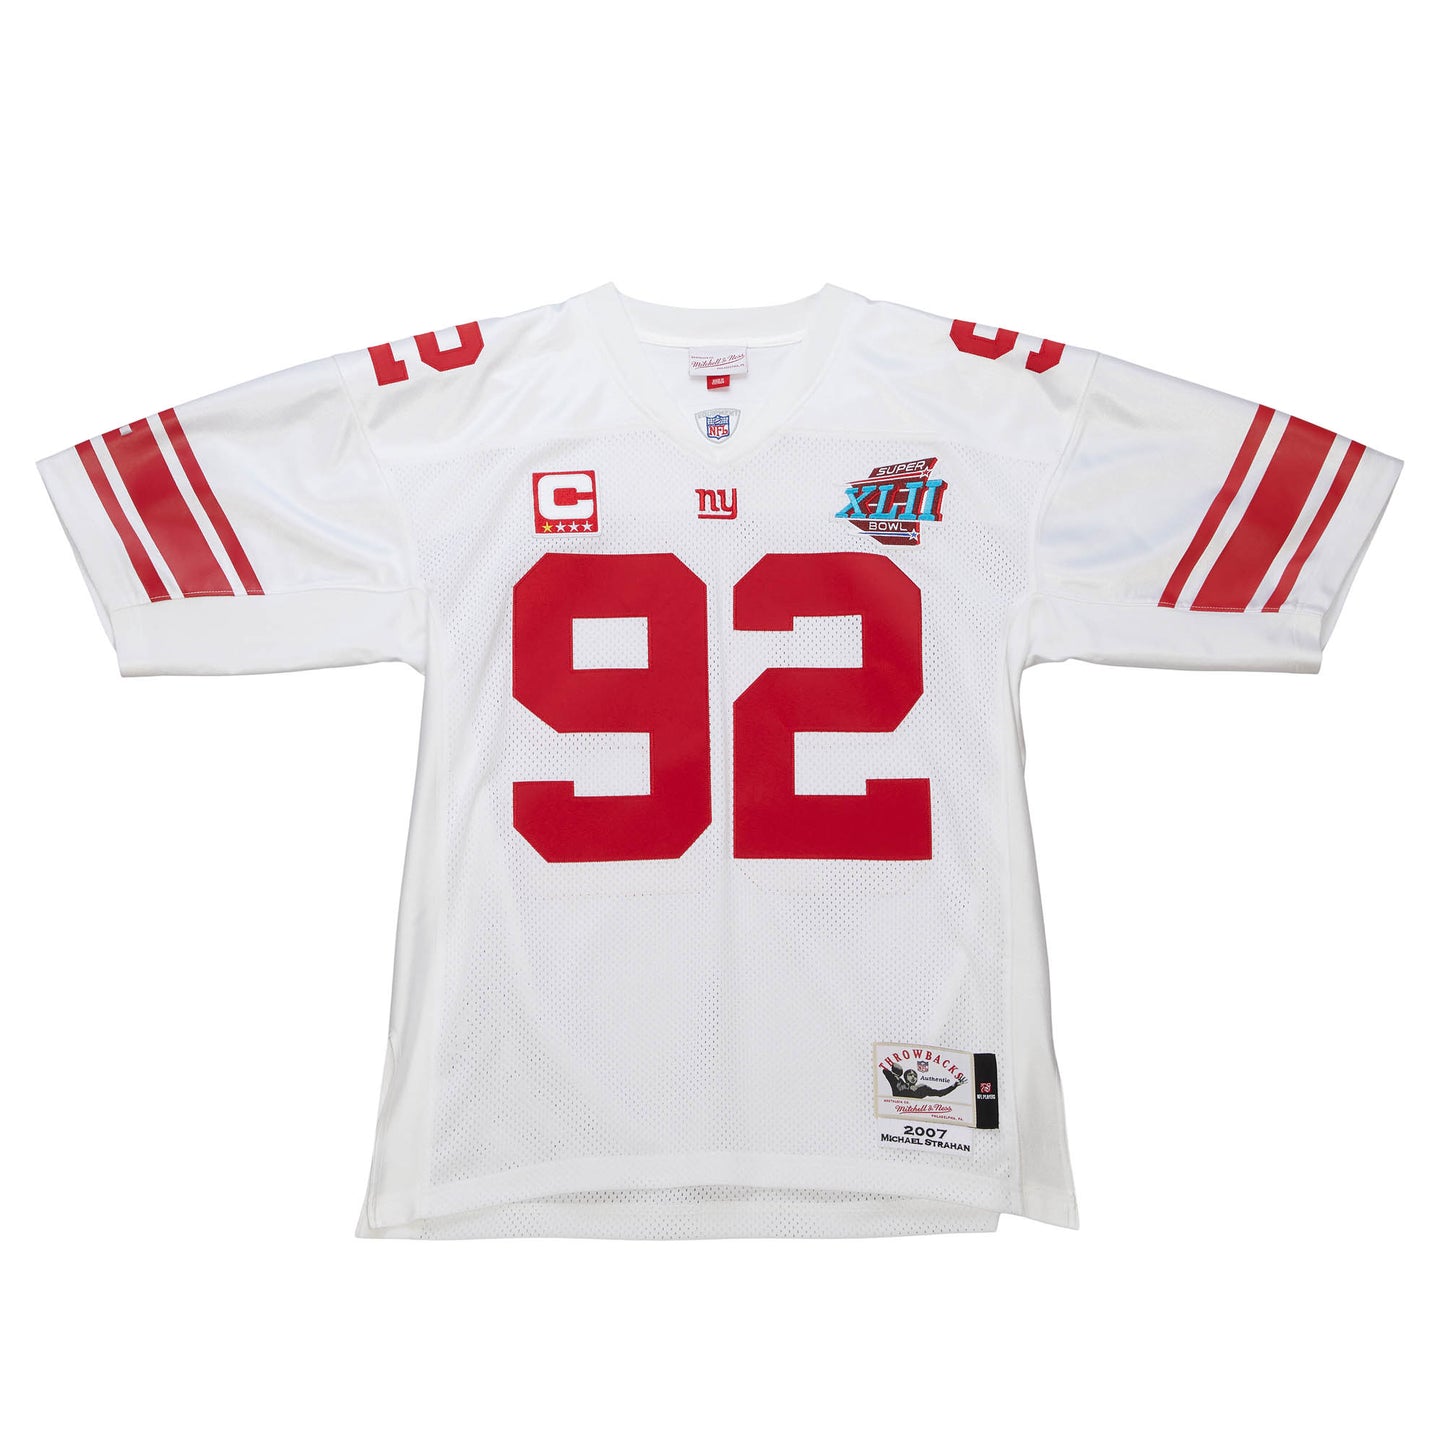 New York Giants Mitchell & Ness # 92 Michael Strahan 2007 Authentic Jersey-White